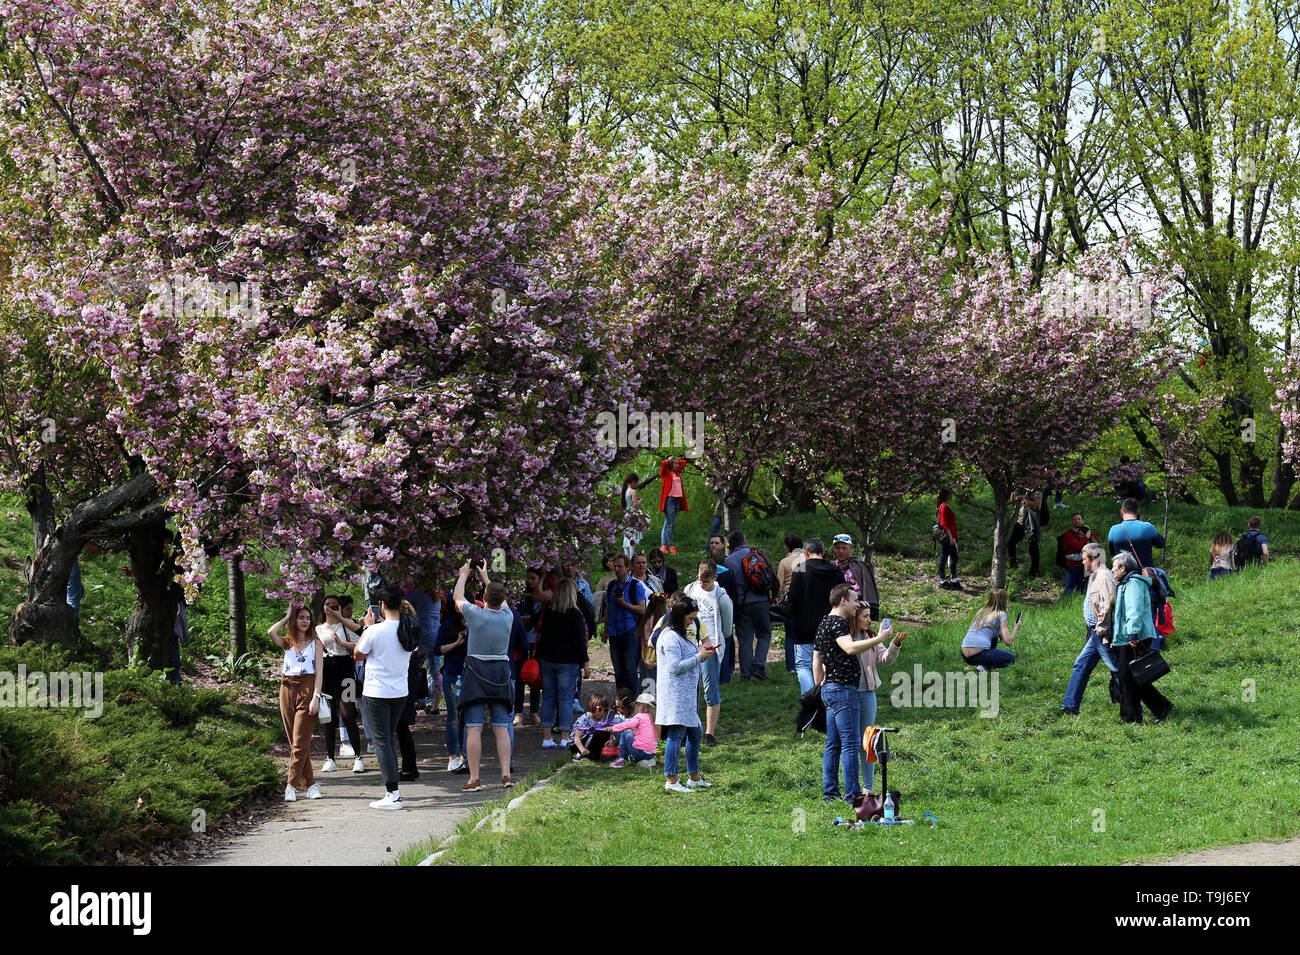 May 5, 2019 - Kiev, kiev, Ukraine - Visitors seen at the Hryshko National Botanical Garden..Hryshko National Botanical Garden is a botanical garden of the National Academy of Sciences of Ukraine. It contains 13,000 types of trees, shrubs, flowers and other plants from all over the world and The Botanical garden can impress with more than 350 species of orchids. (Credit Image: © Mohammad Javad Abjoushak/SOPA Images via ZUMA Wire) Stock Photo